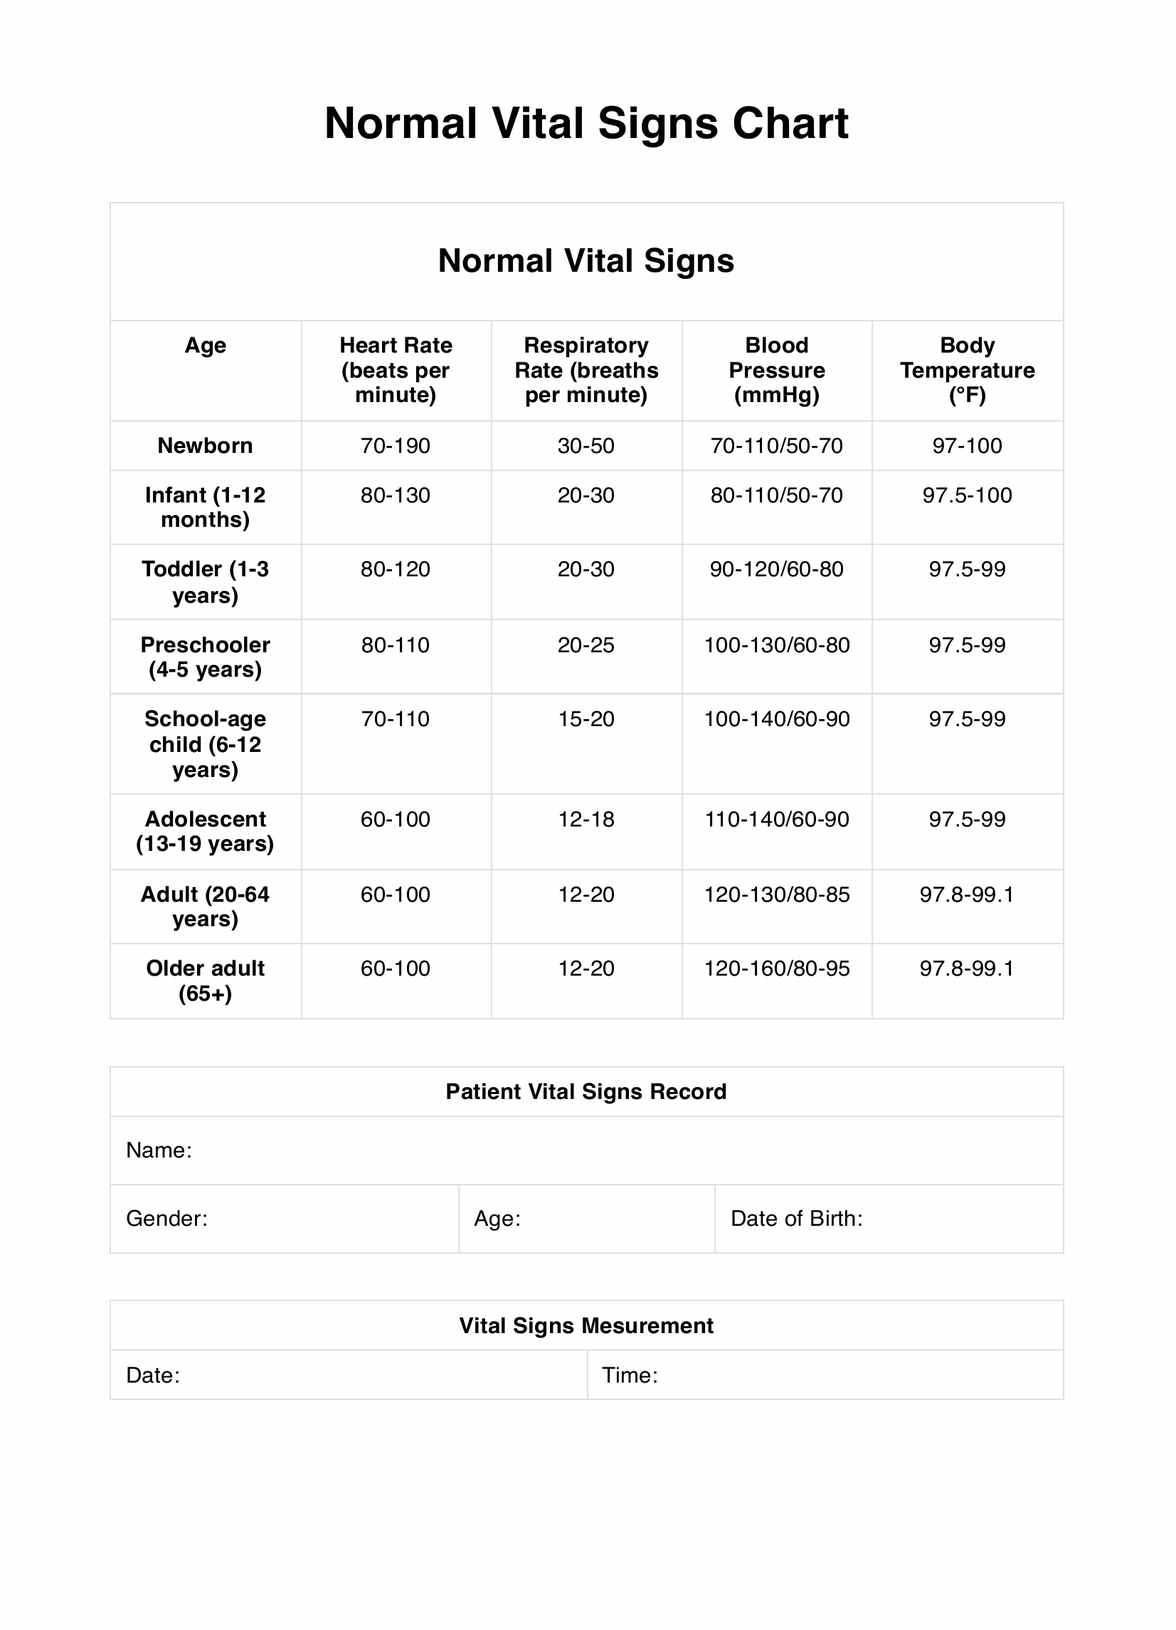 Normal Vital Signs Chart PDF Example